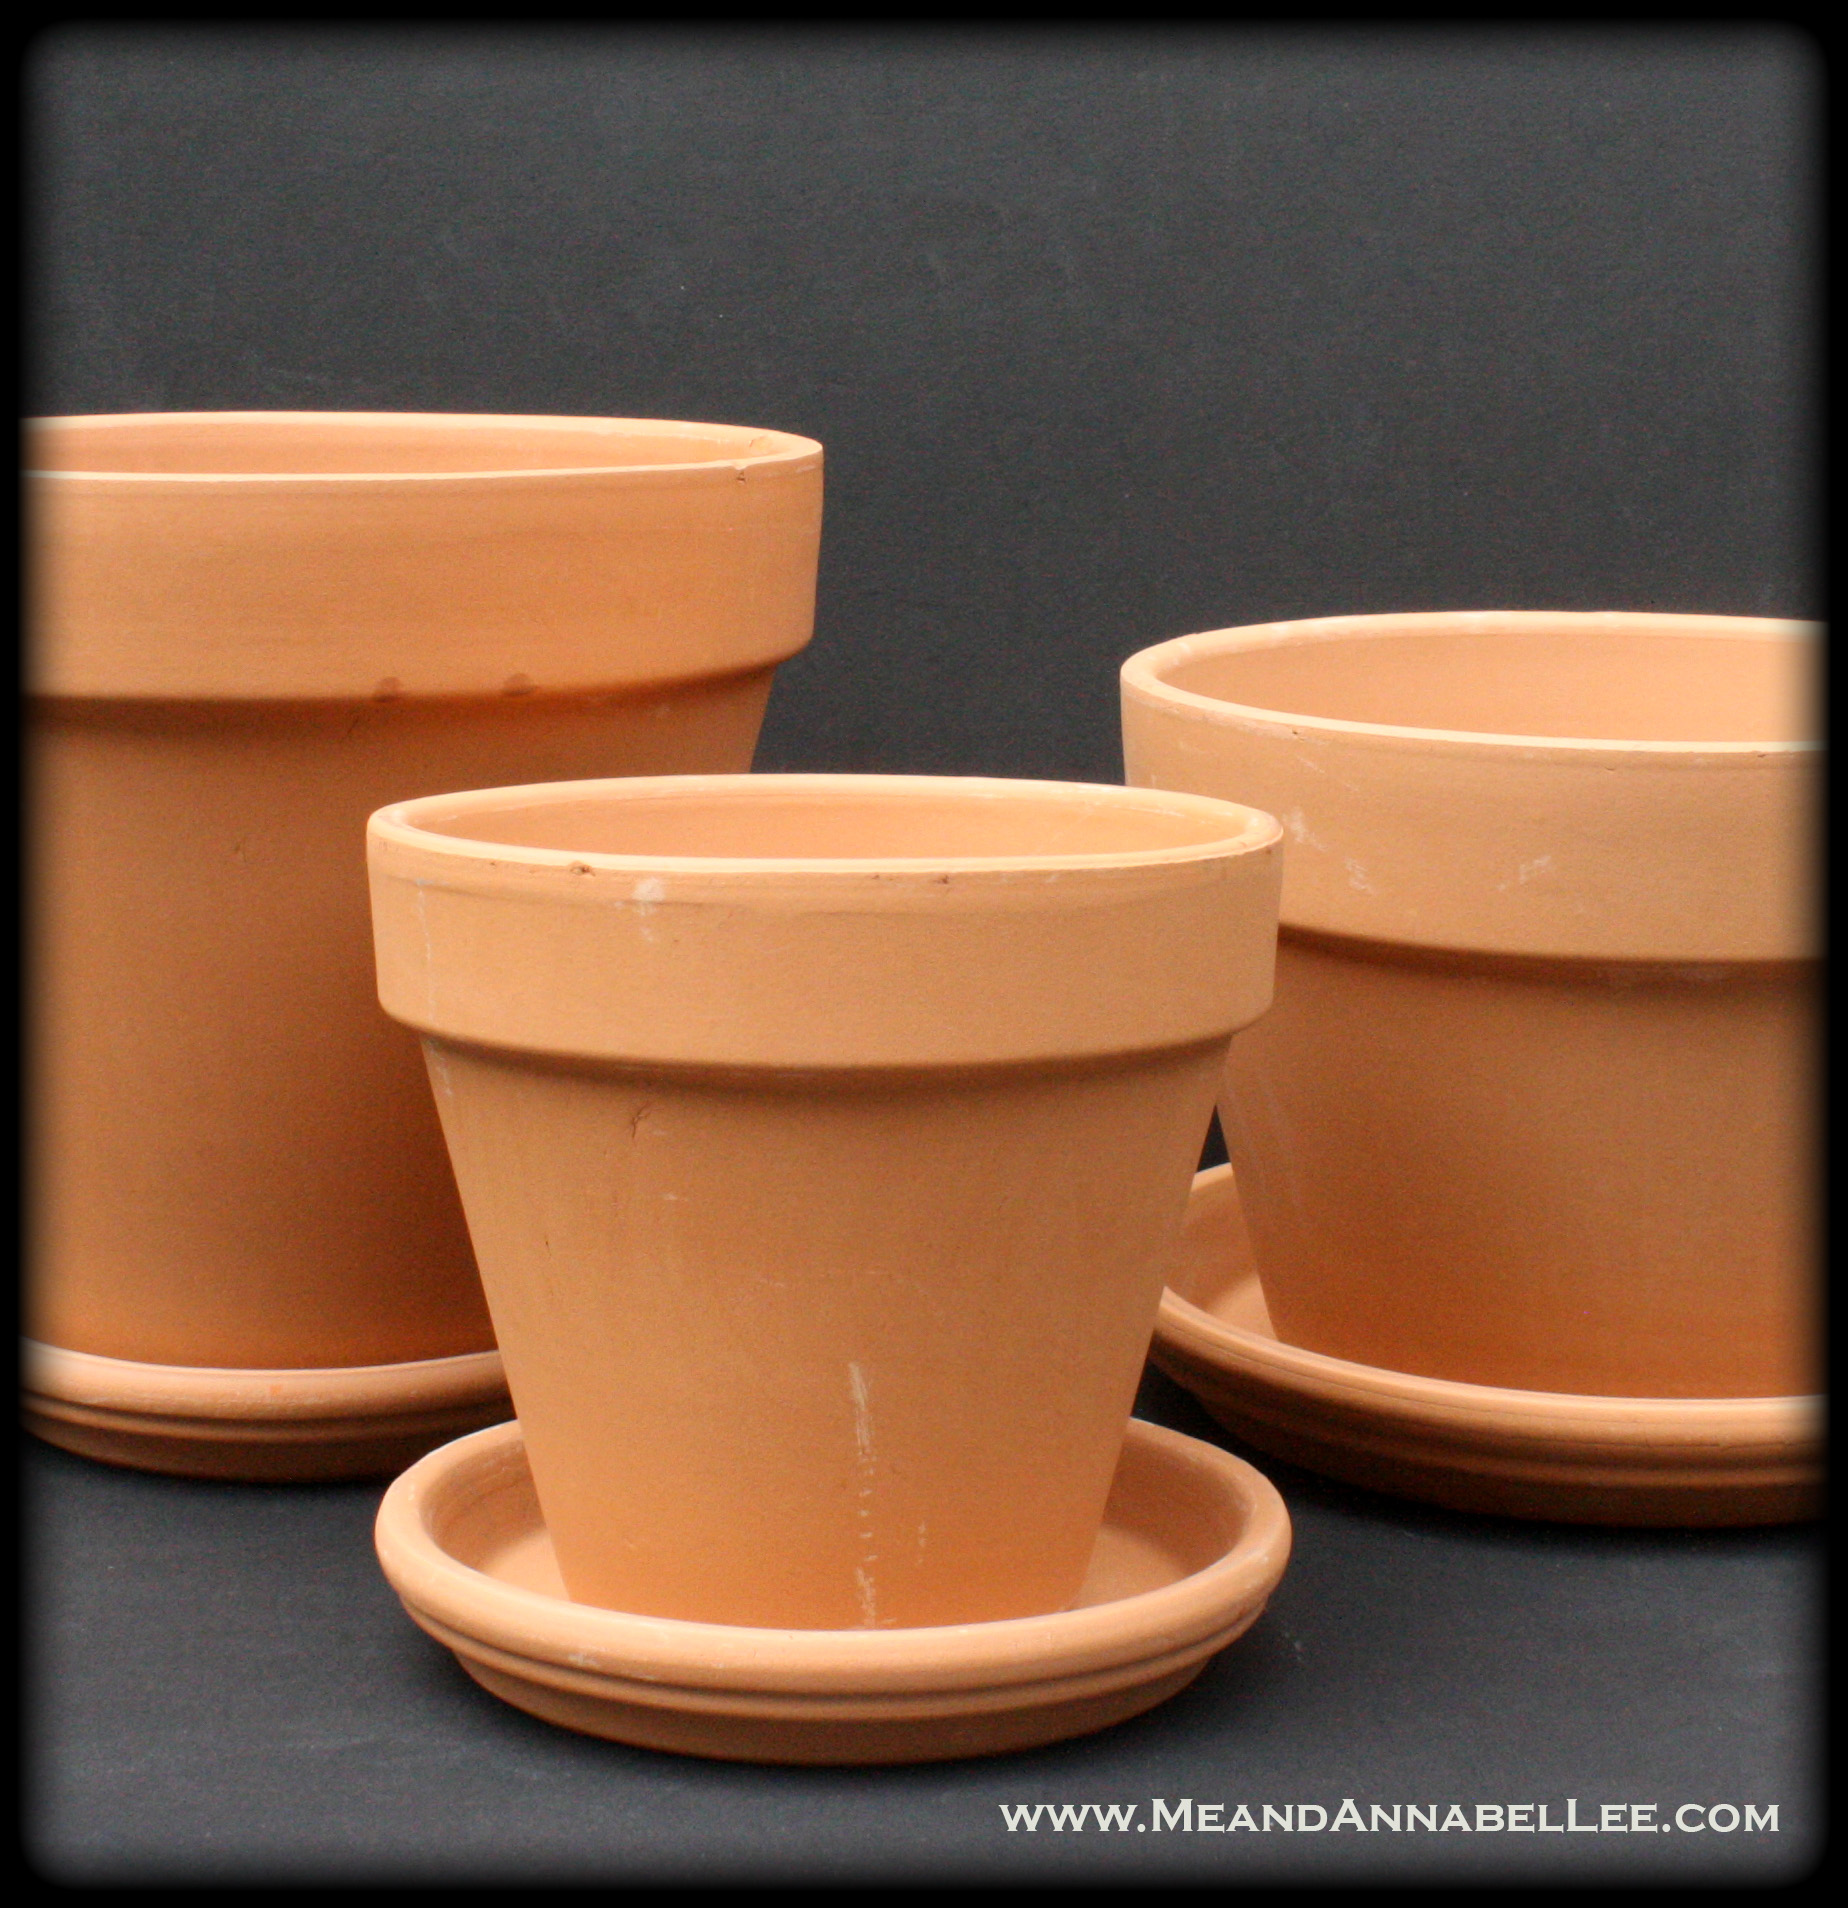 BEFORE - Decoupage Terra Cotta Flower Pots with Halloween Napkins | www.Meand AnnabelLee.com